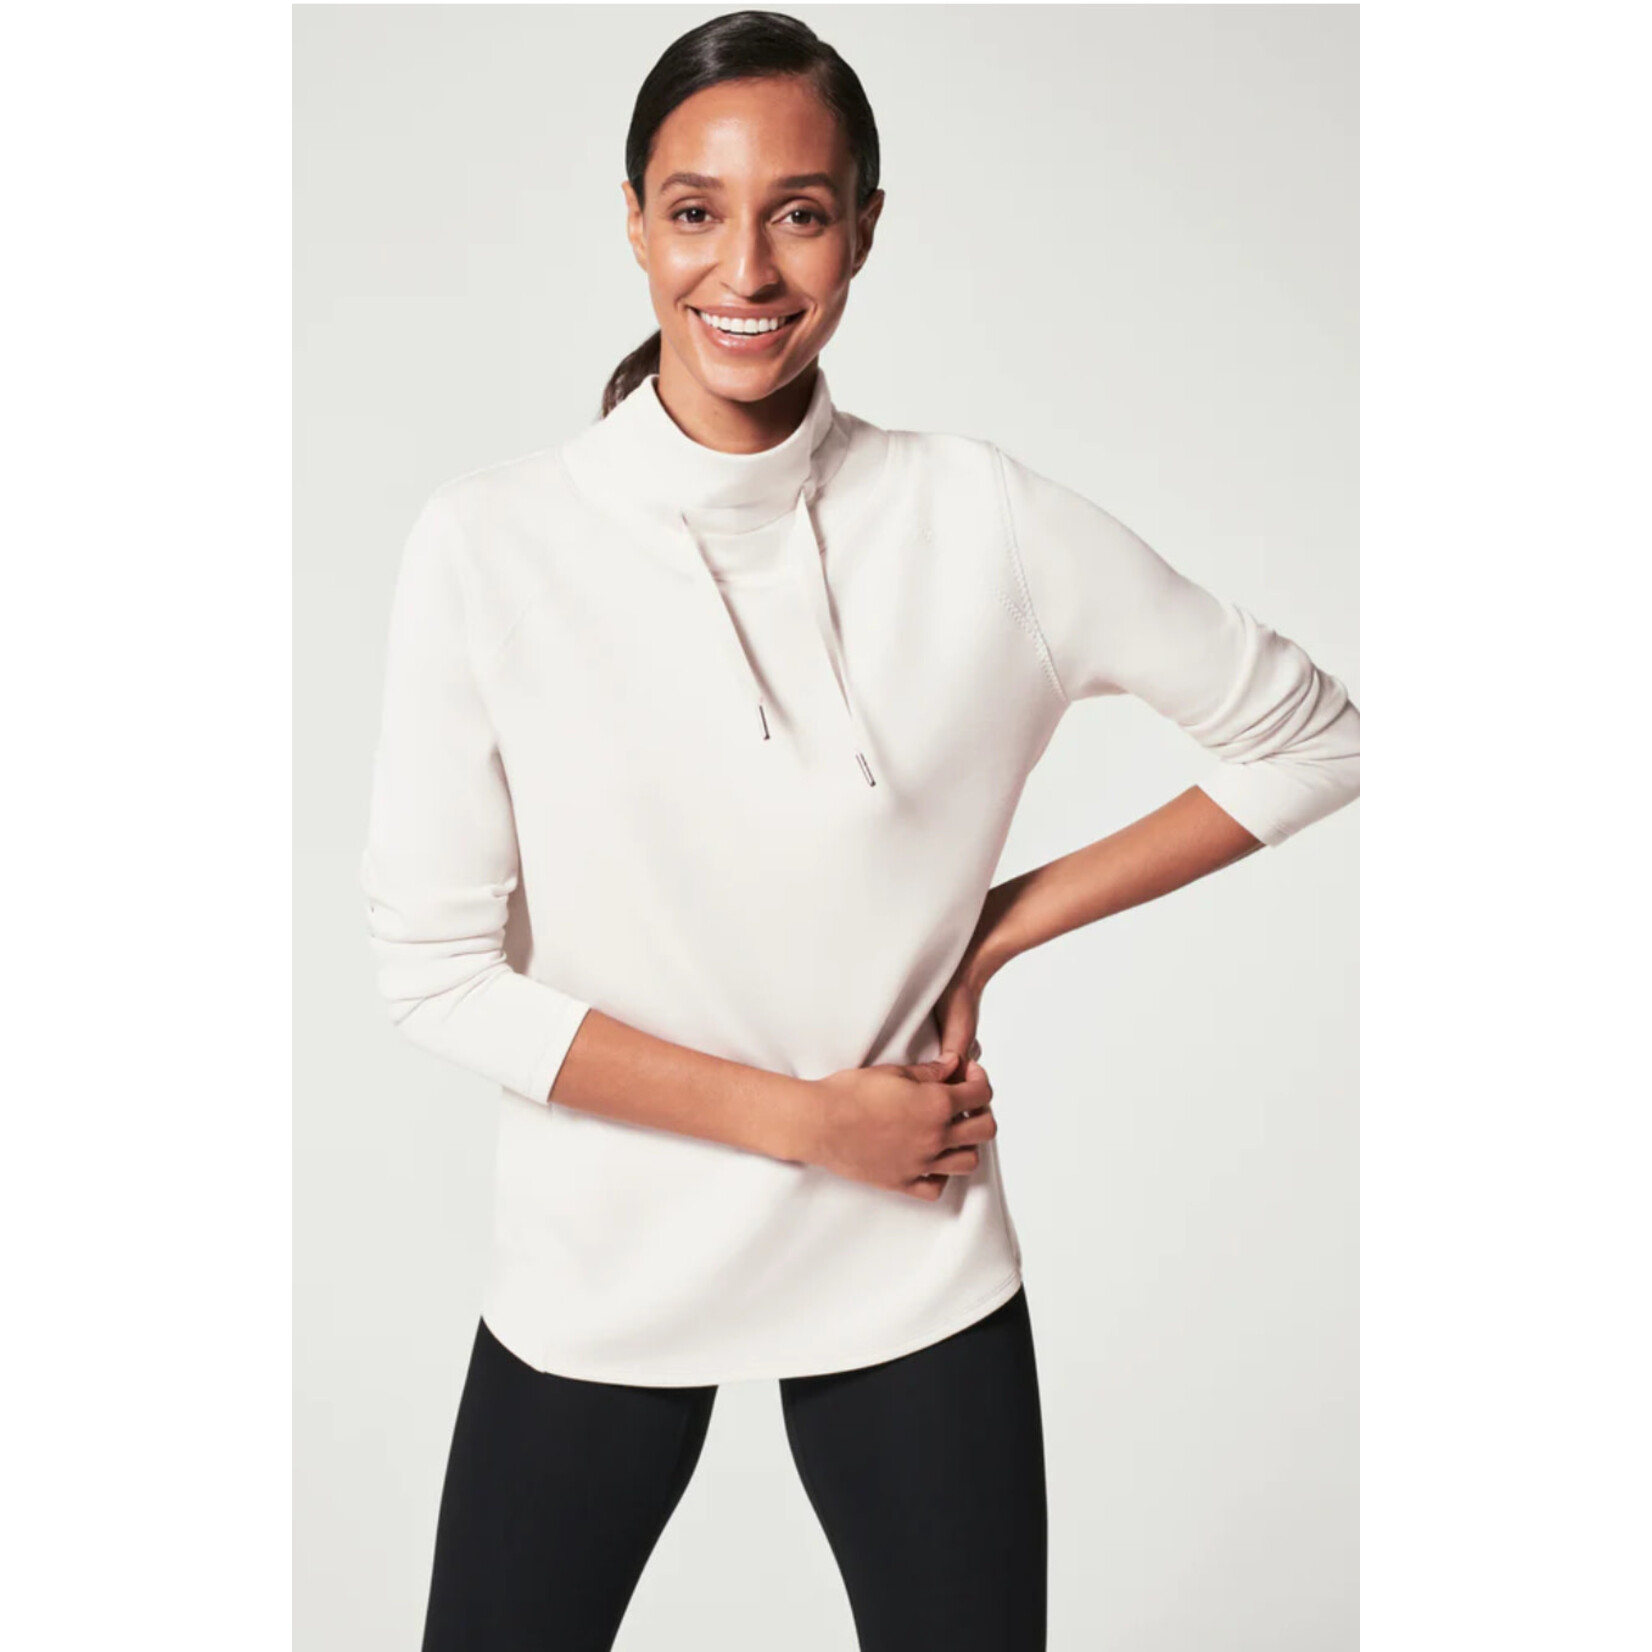 Spanx airessentials ‘got-ya-covered’ pullover